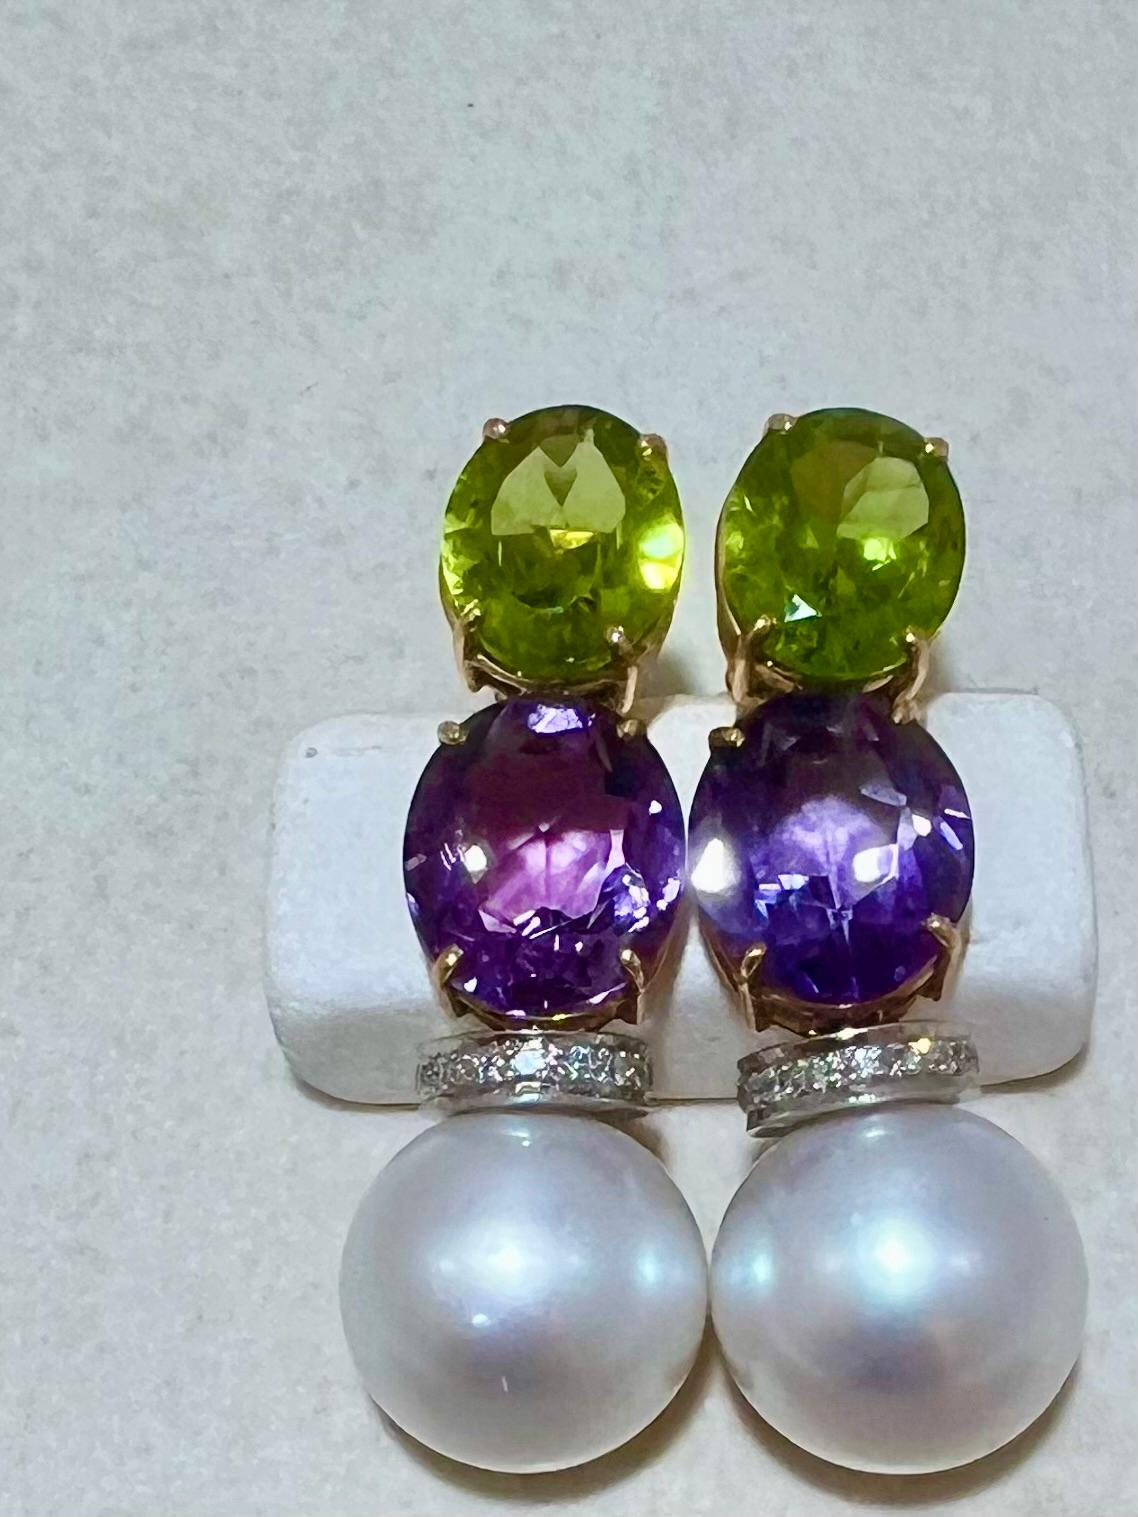 Earrings with Souths Sea Pearls (13mm) with Amethyst, Peridot and Diamonds 0,26ct Hvvs in yellow Gold 18k